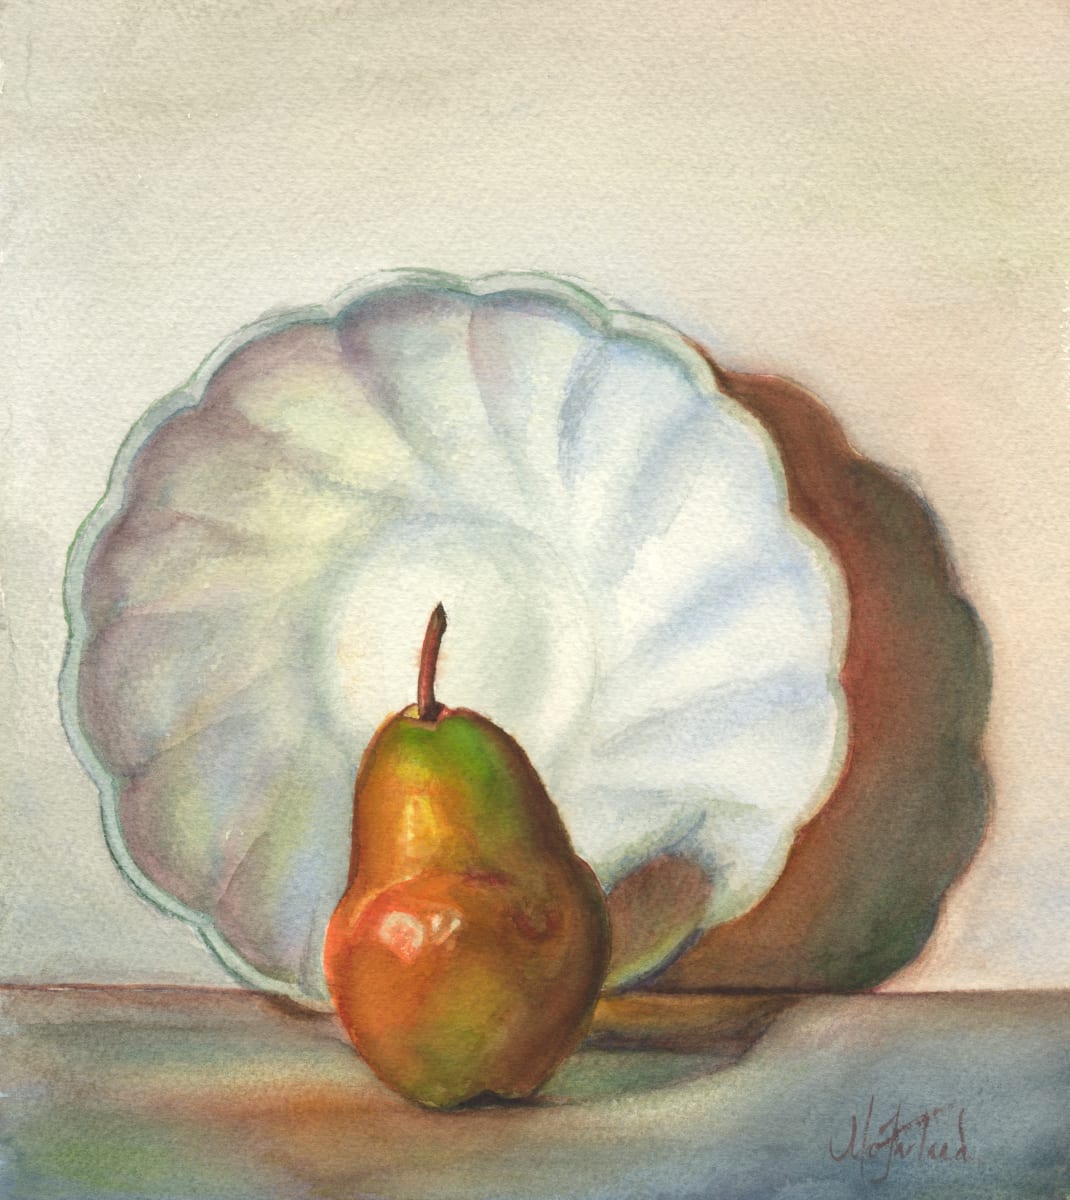 Pear & Plate - Prints Available by Monique McFarland 